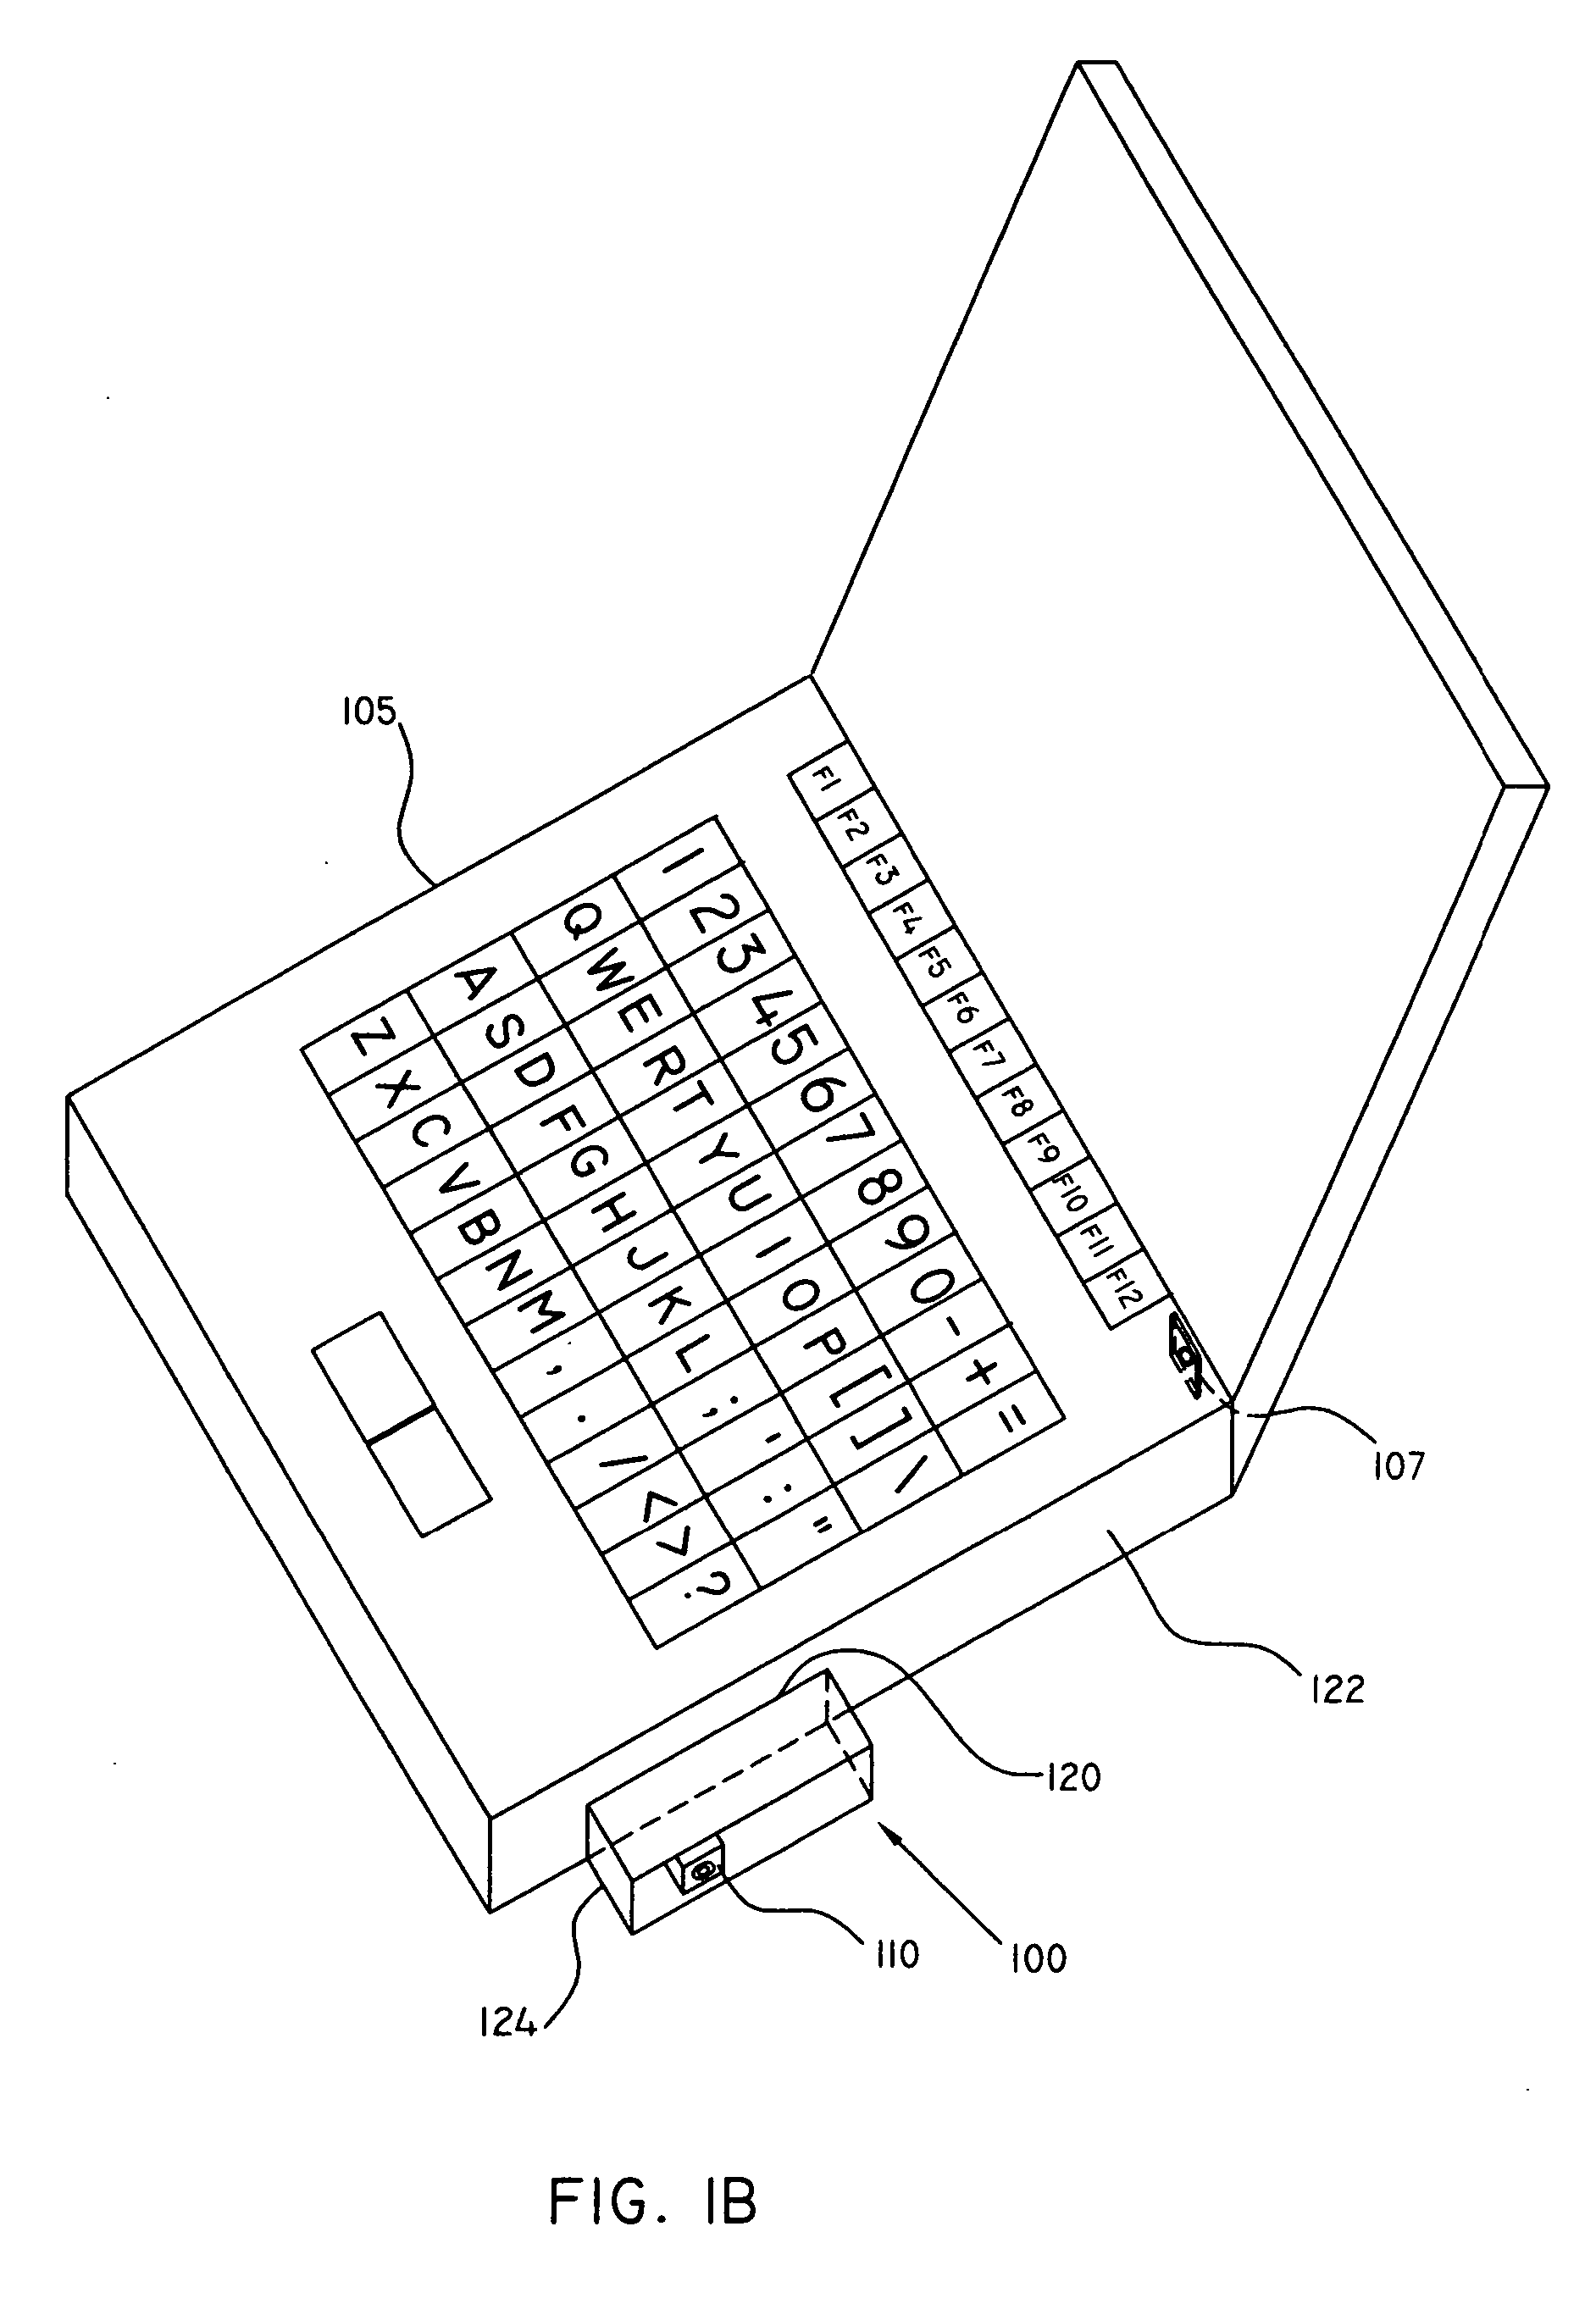 Replacement battery pack with built-in charging circuitry and power connector, and AC adapter for reading charging status of replacement battery pack